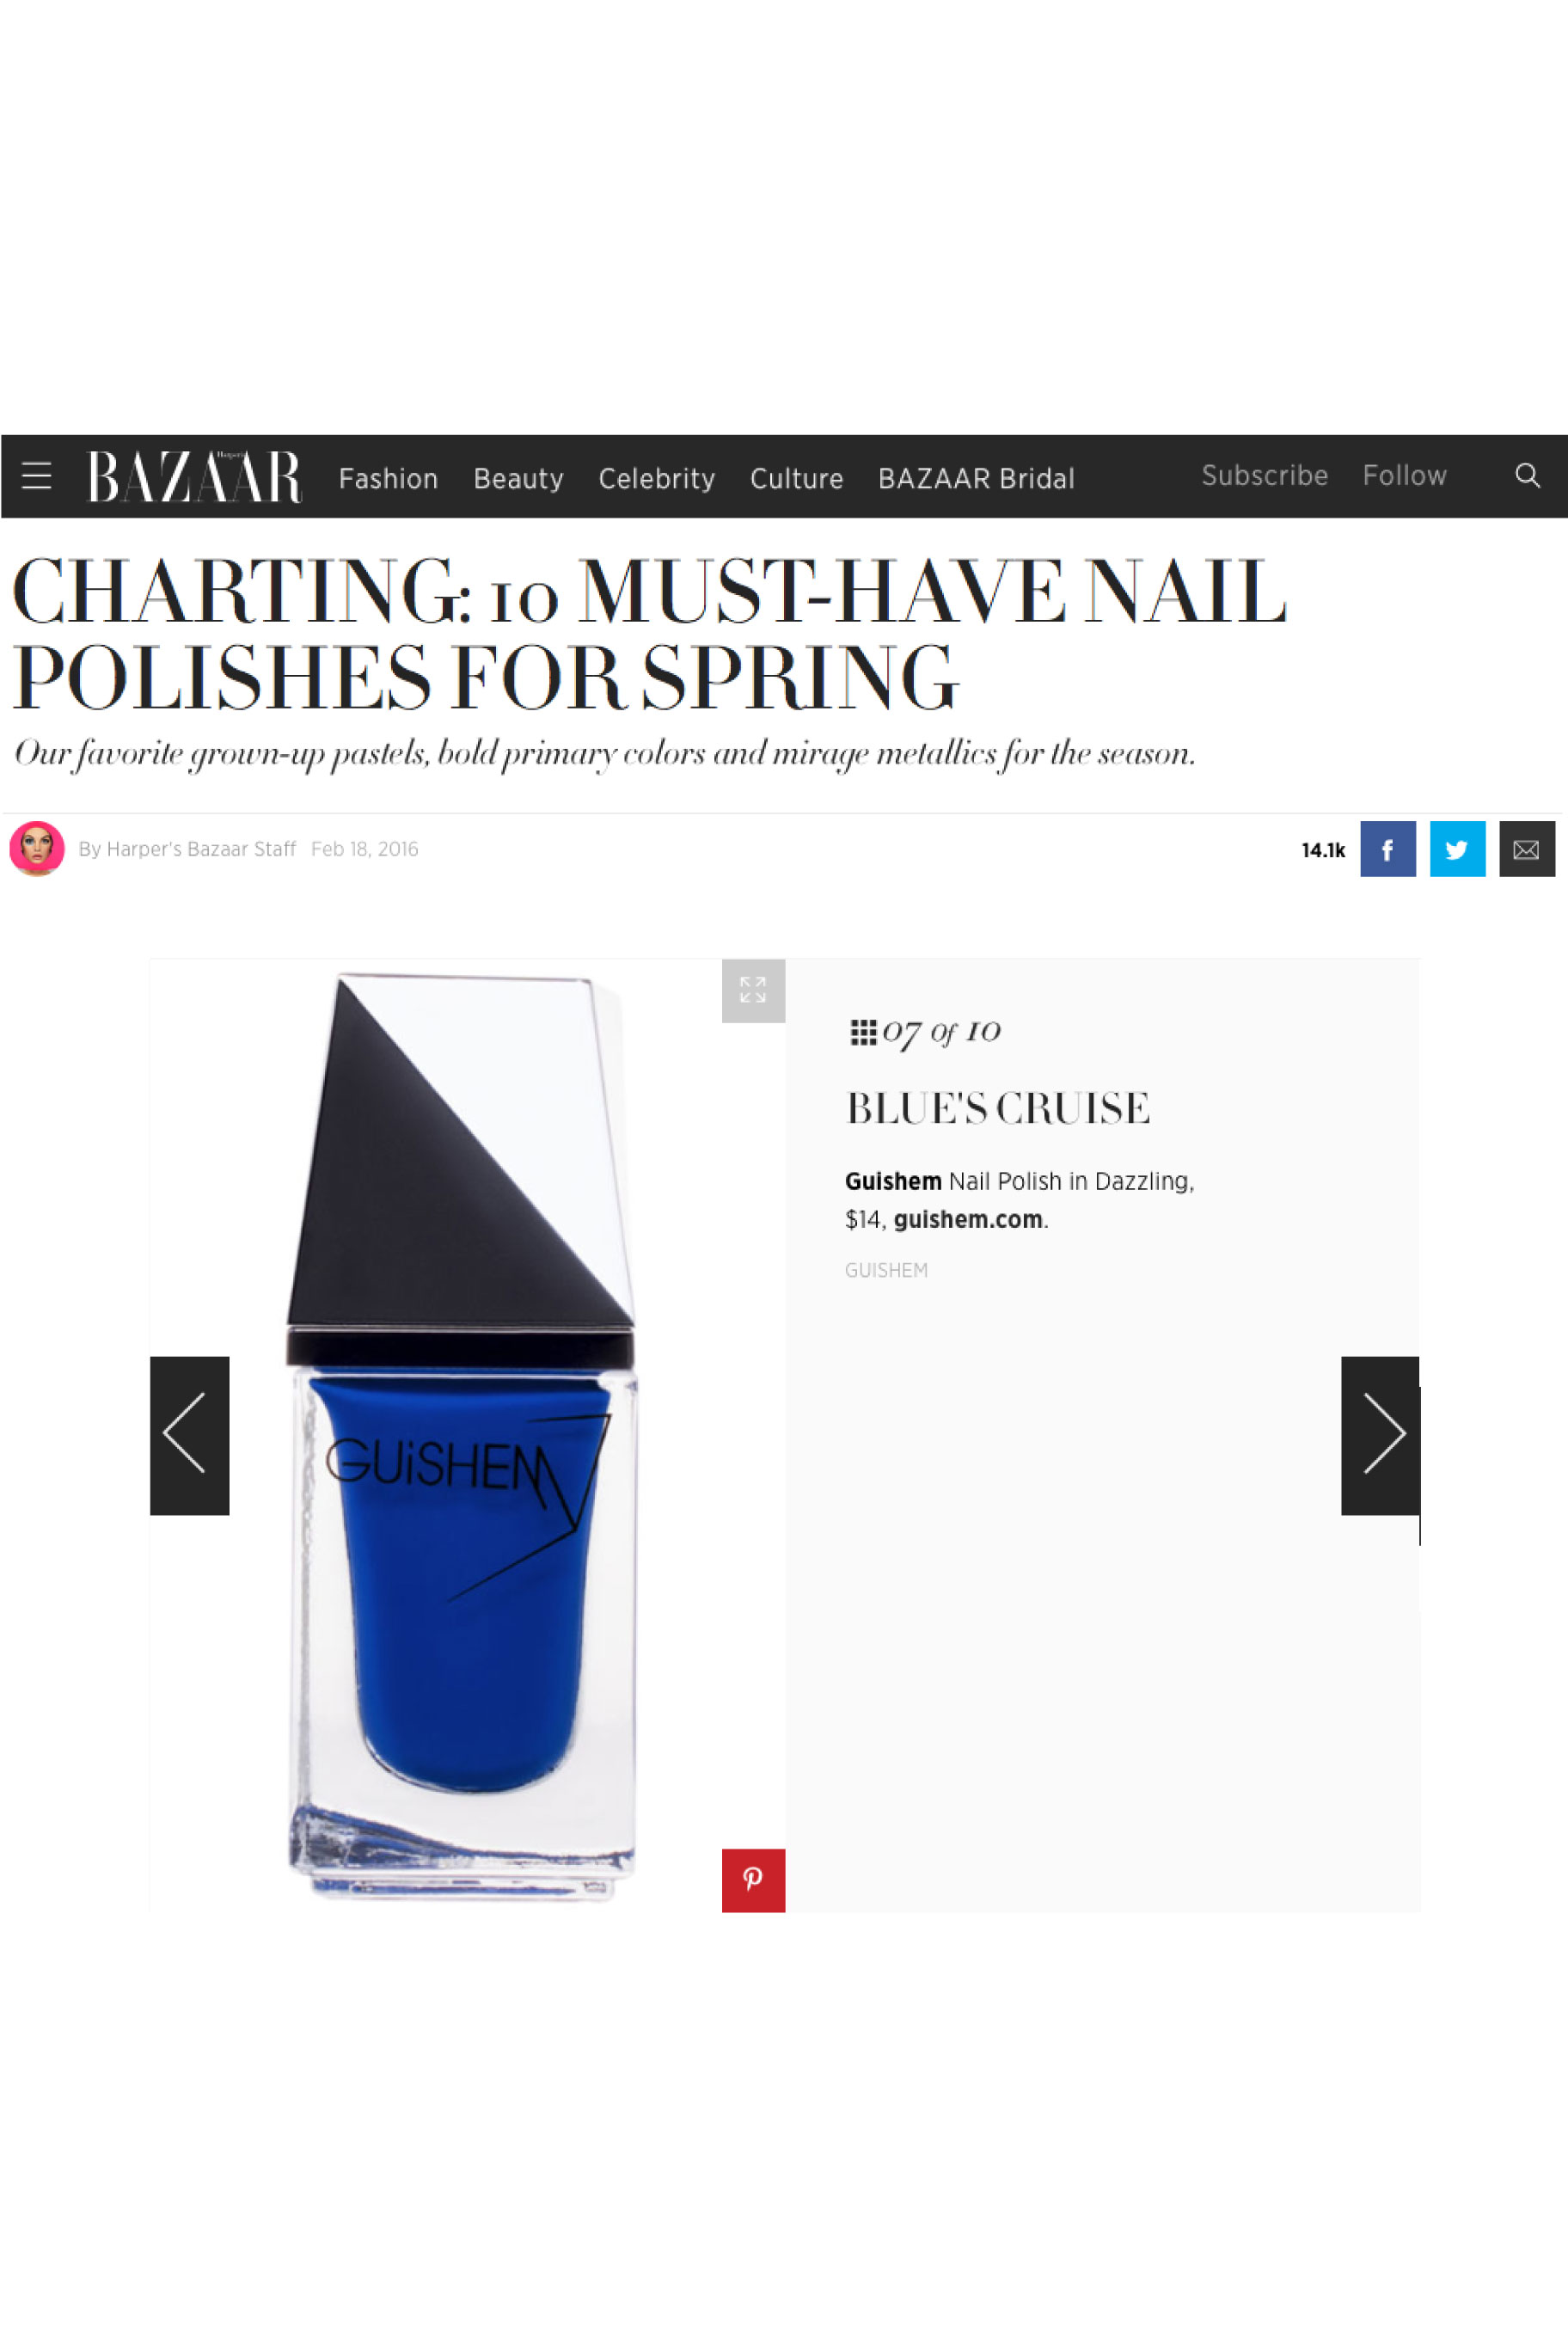 GUiSHEM featured in Bazaar: 10 Must-Have Nail Polishes for Spring